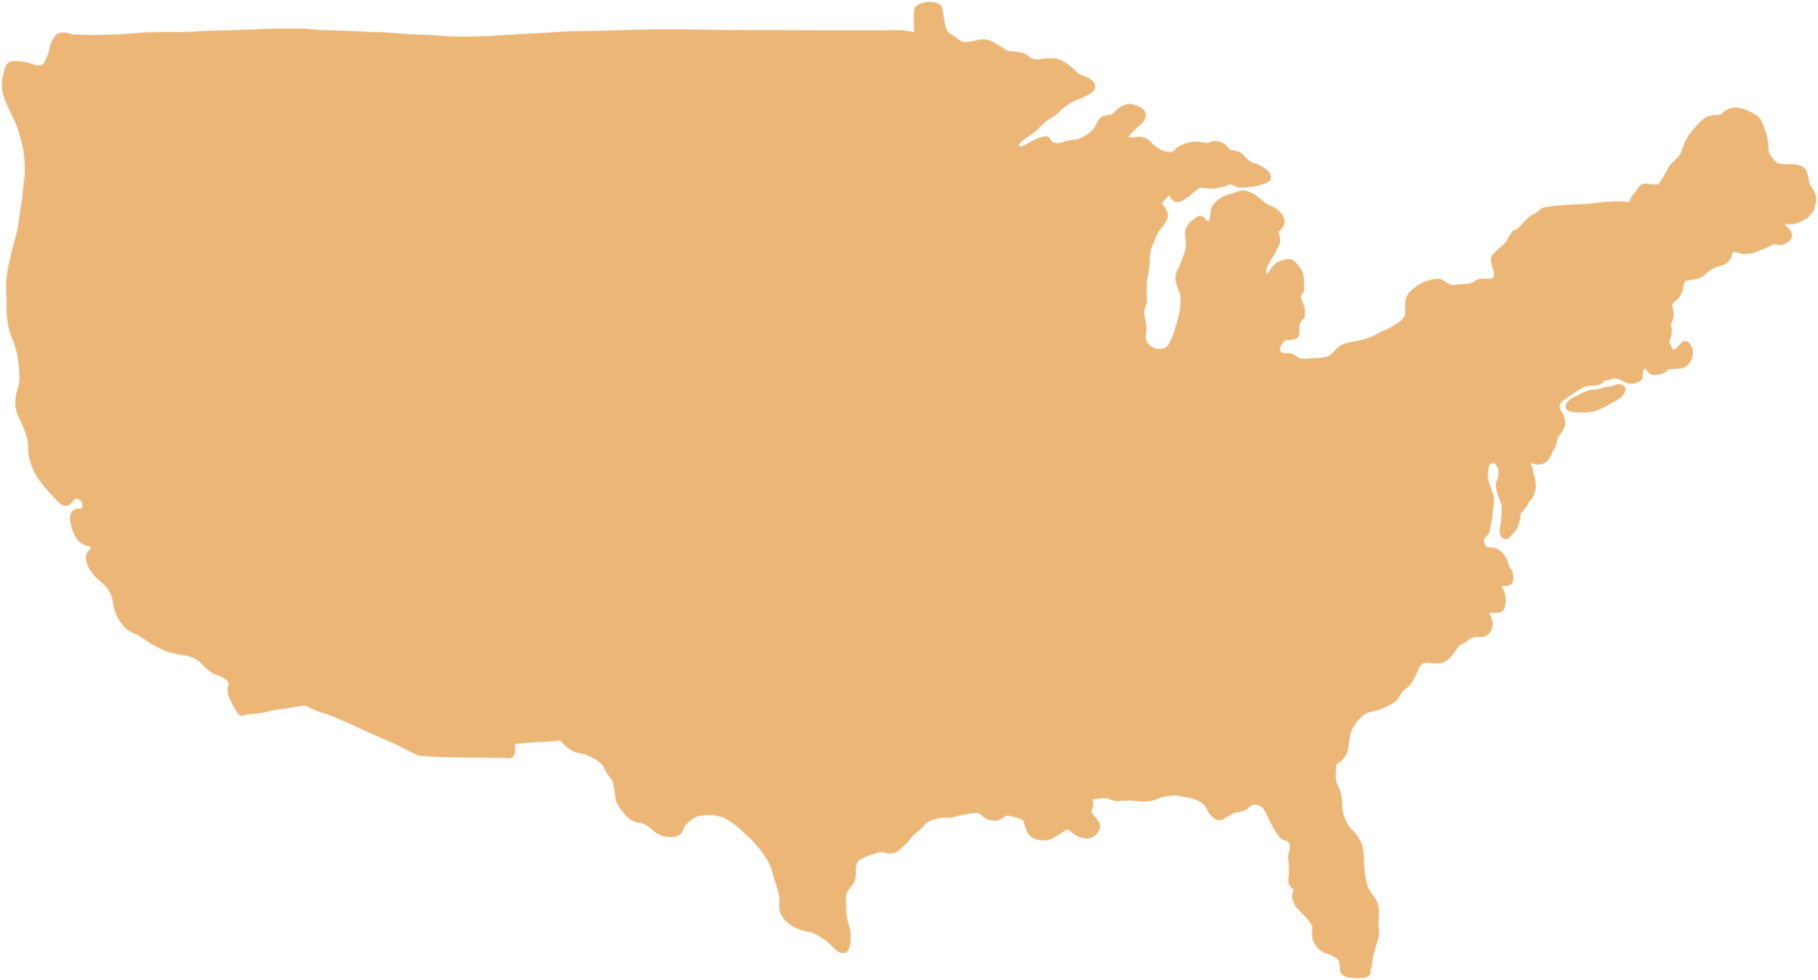 doodle freehand drawing of united state of america map. png